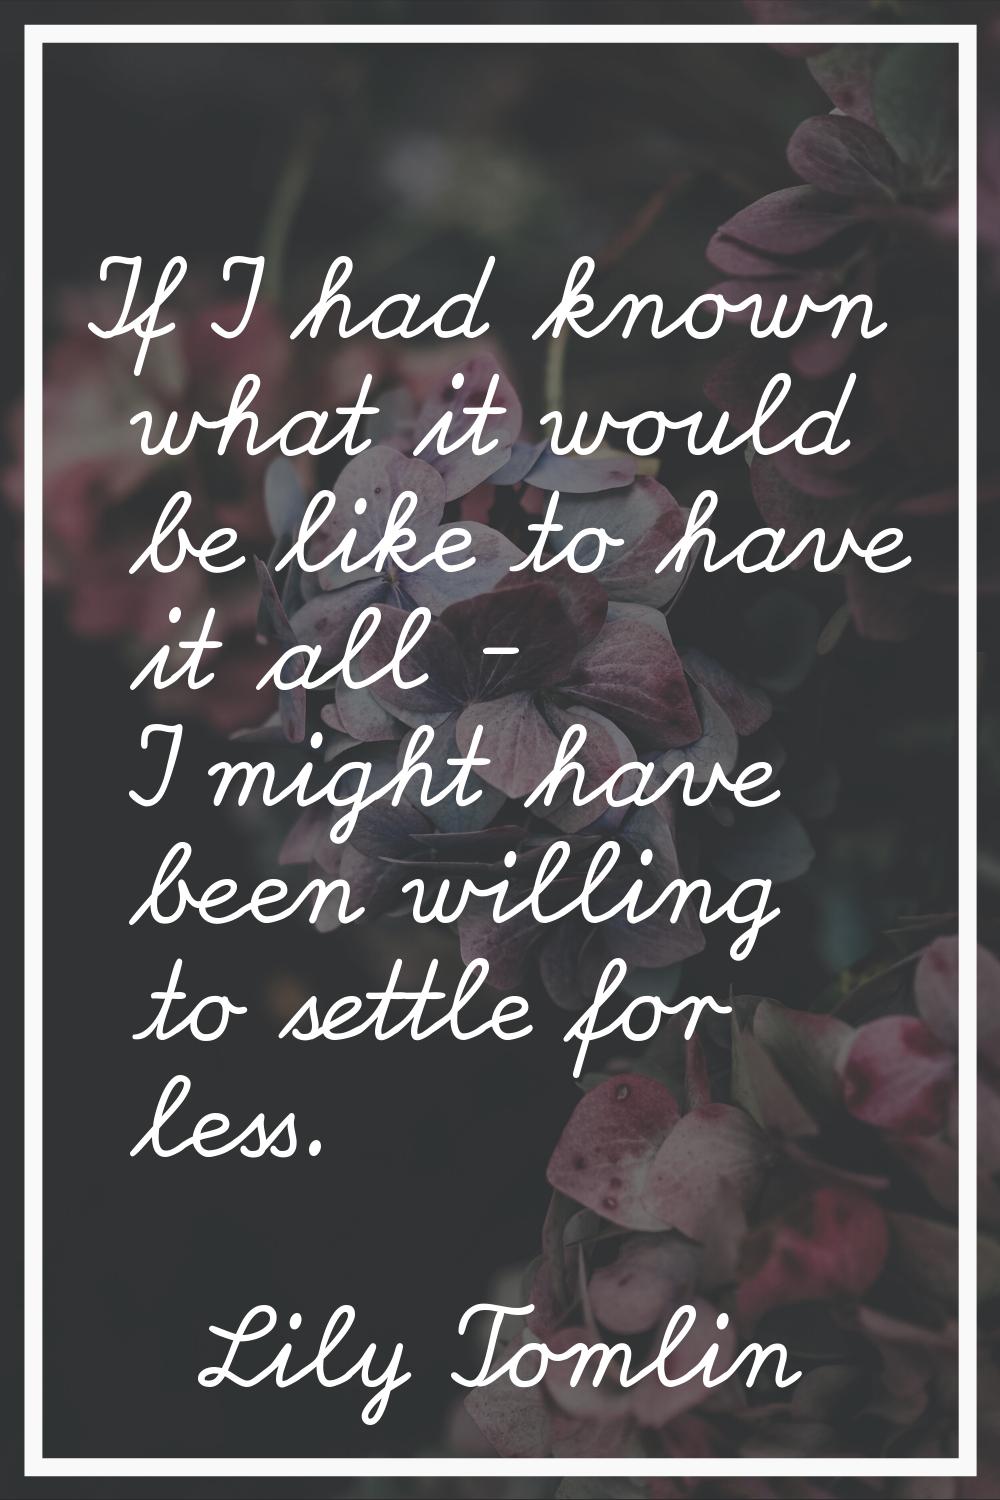 If I had known what it would be like to have it all - I might have been willing to settle for less.